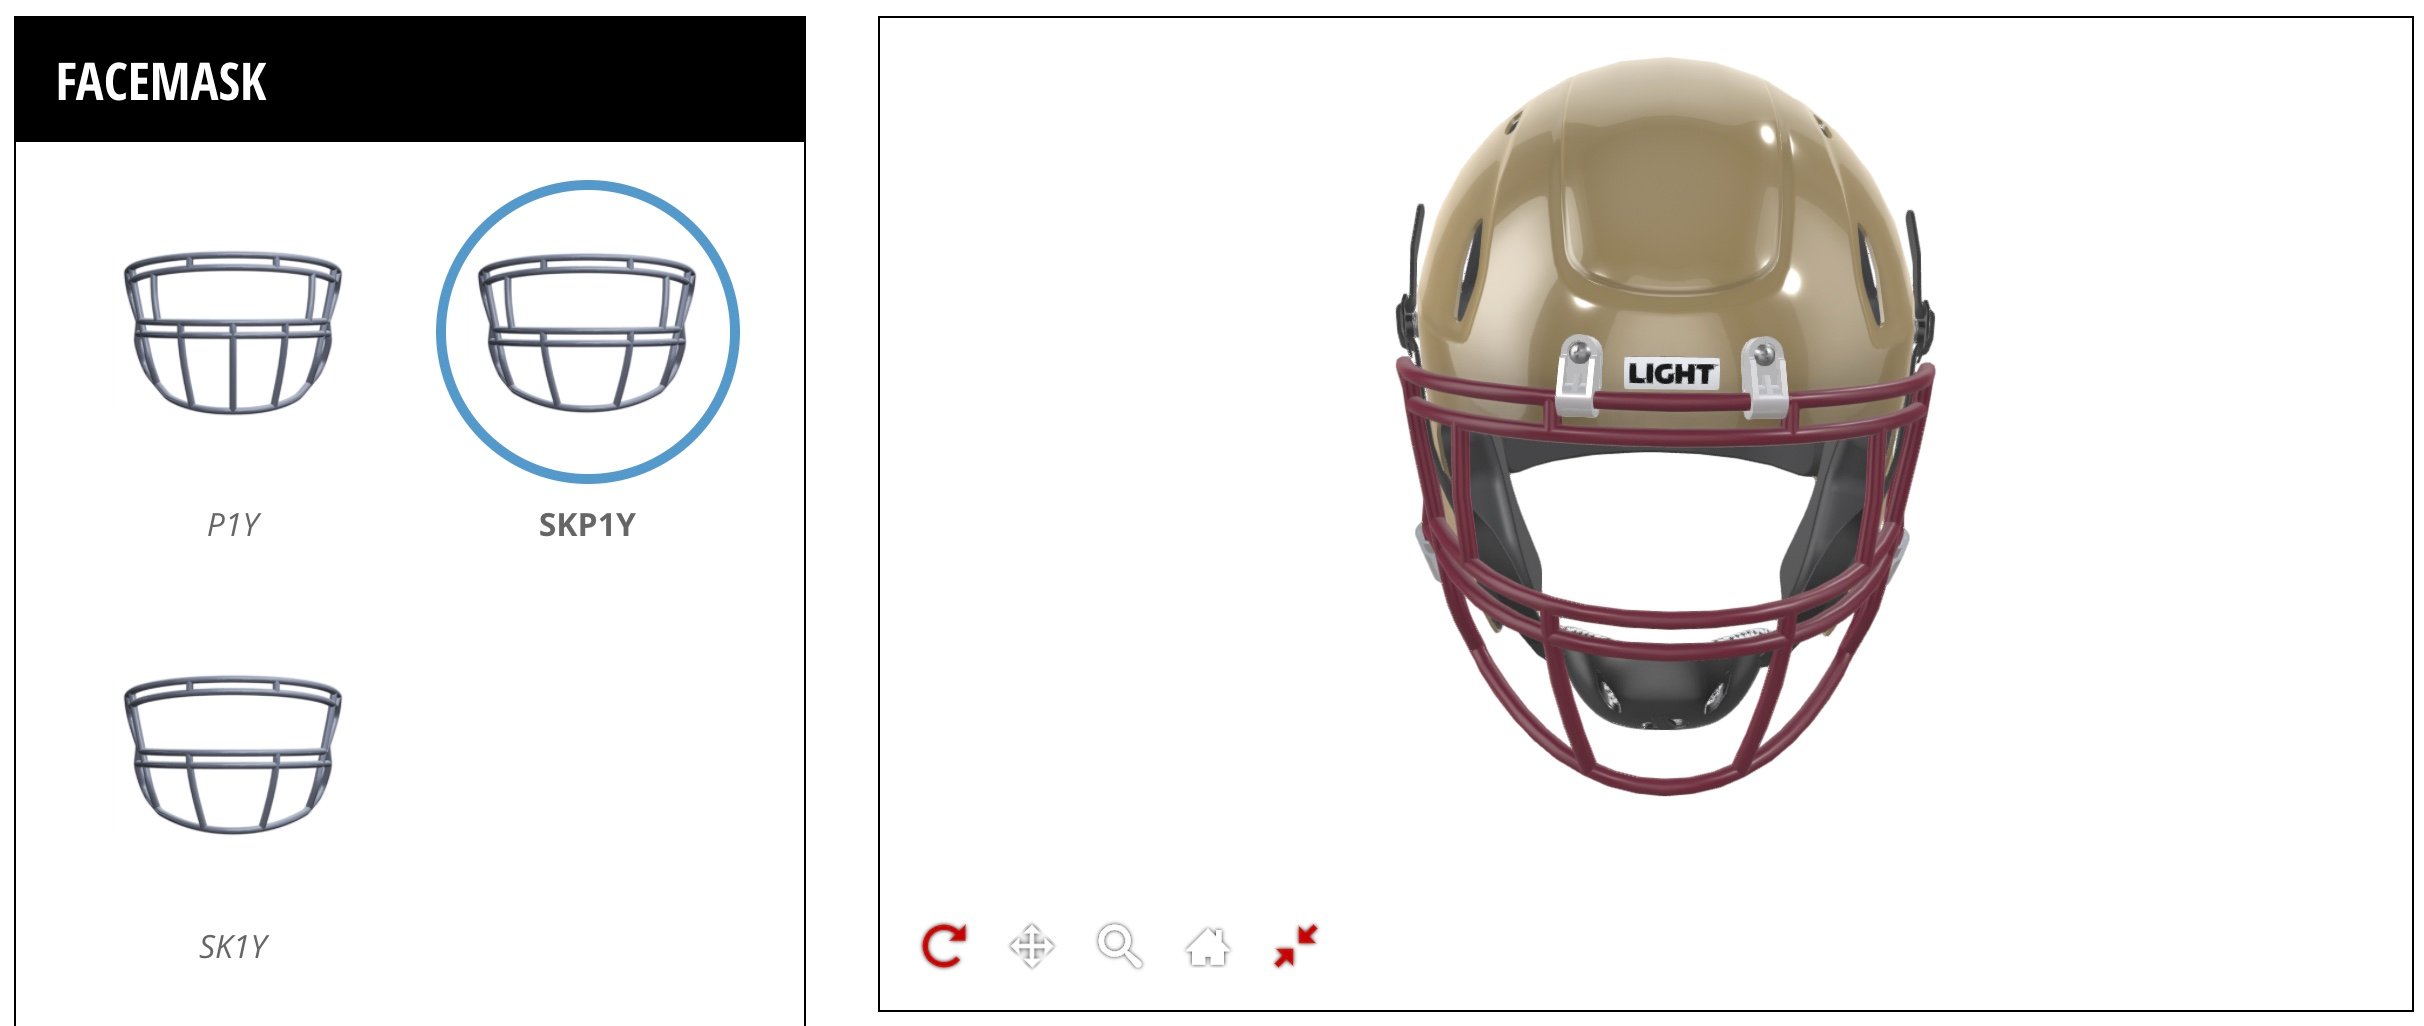 Different facemask options to customize LIGHT Helmets